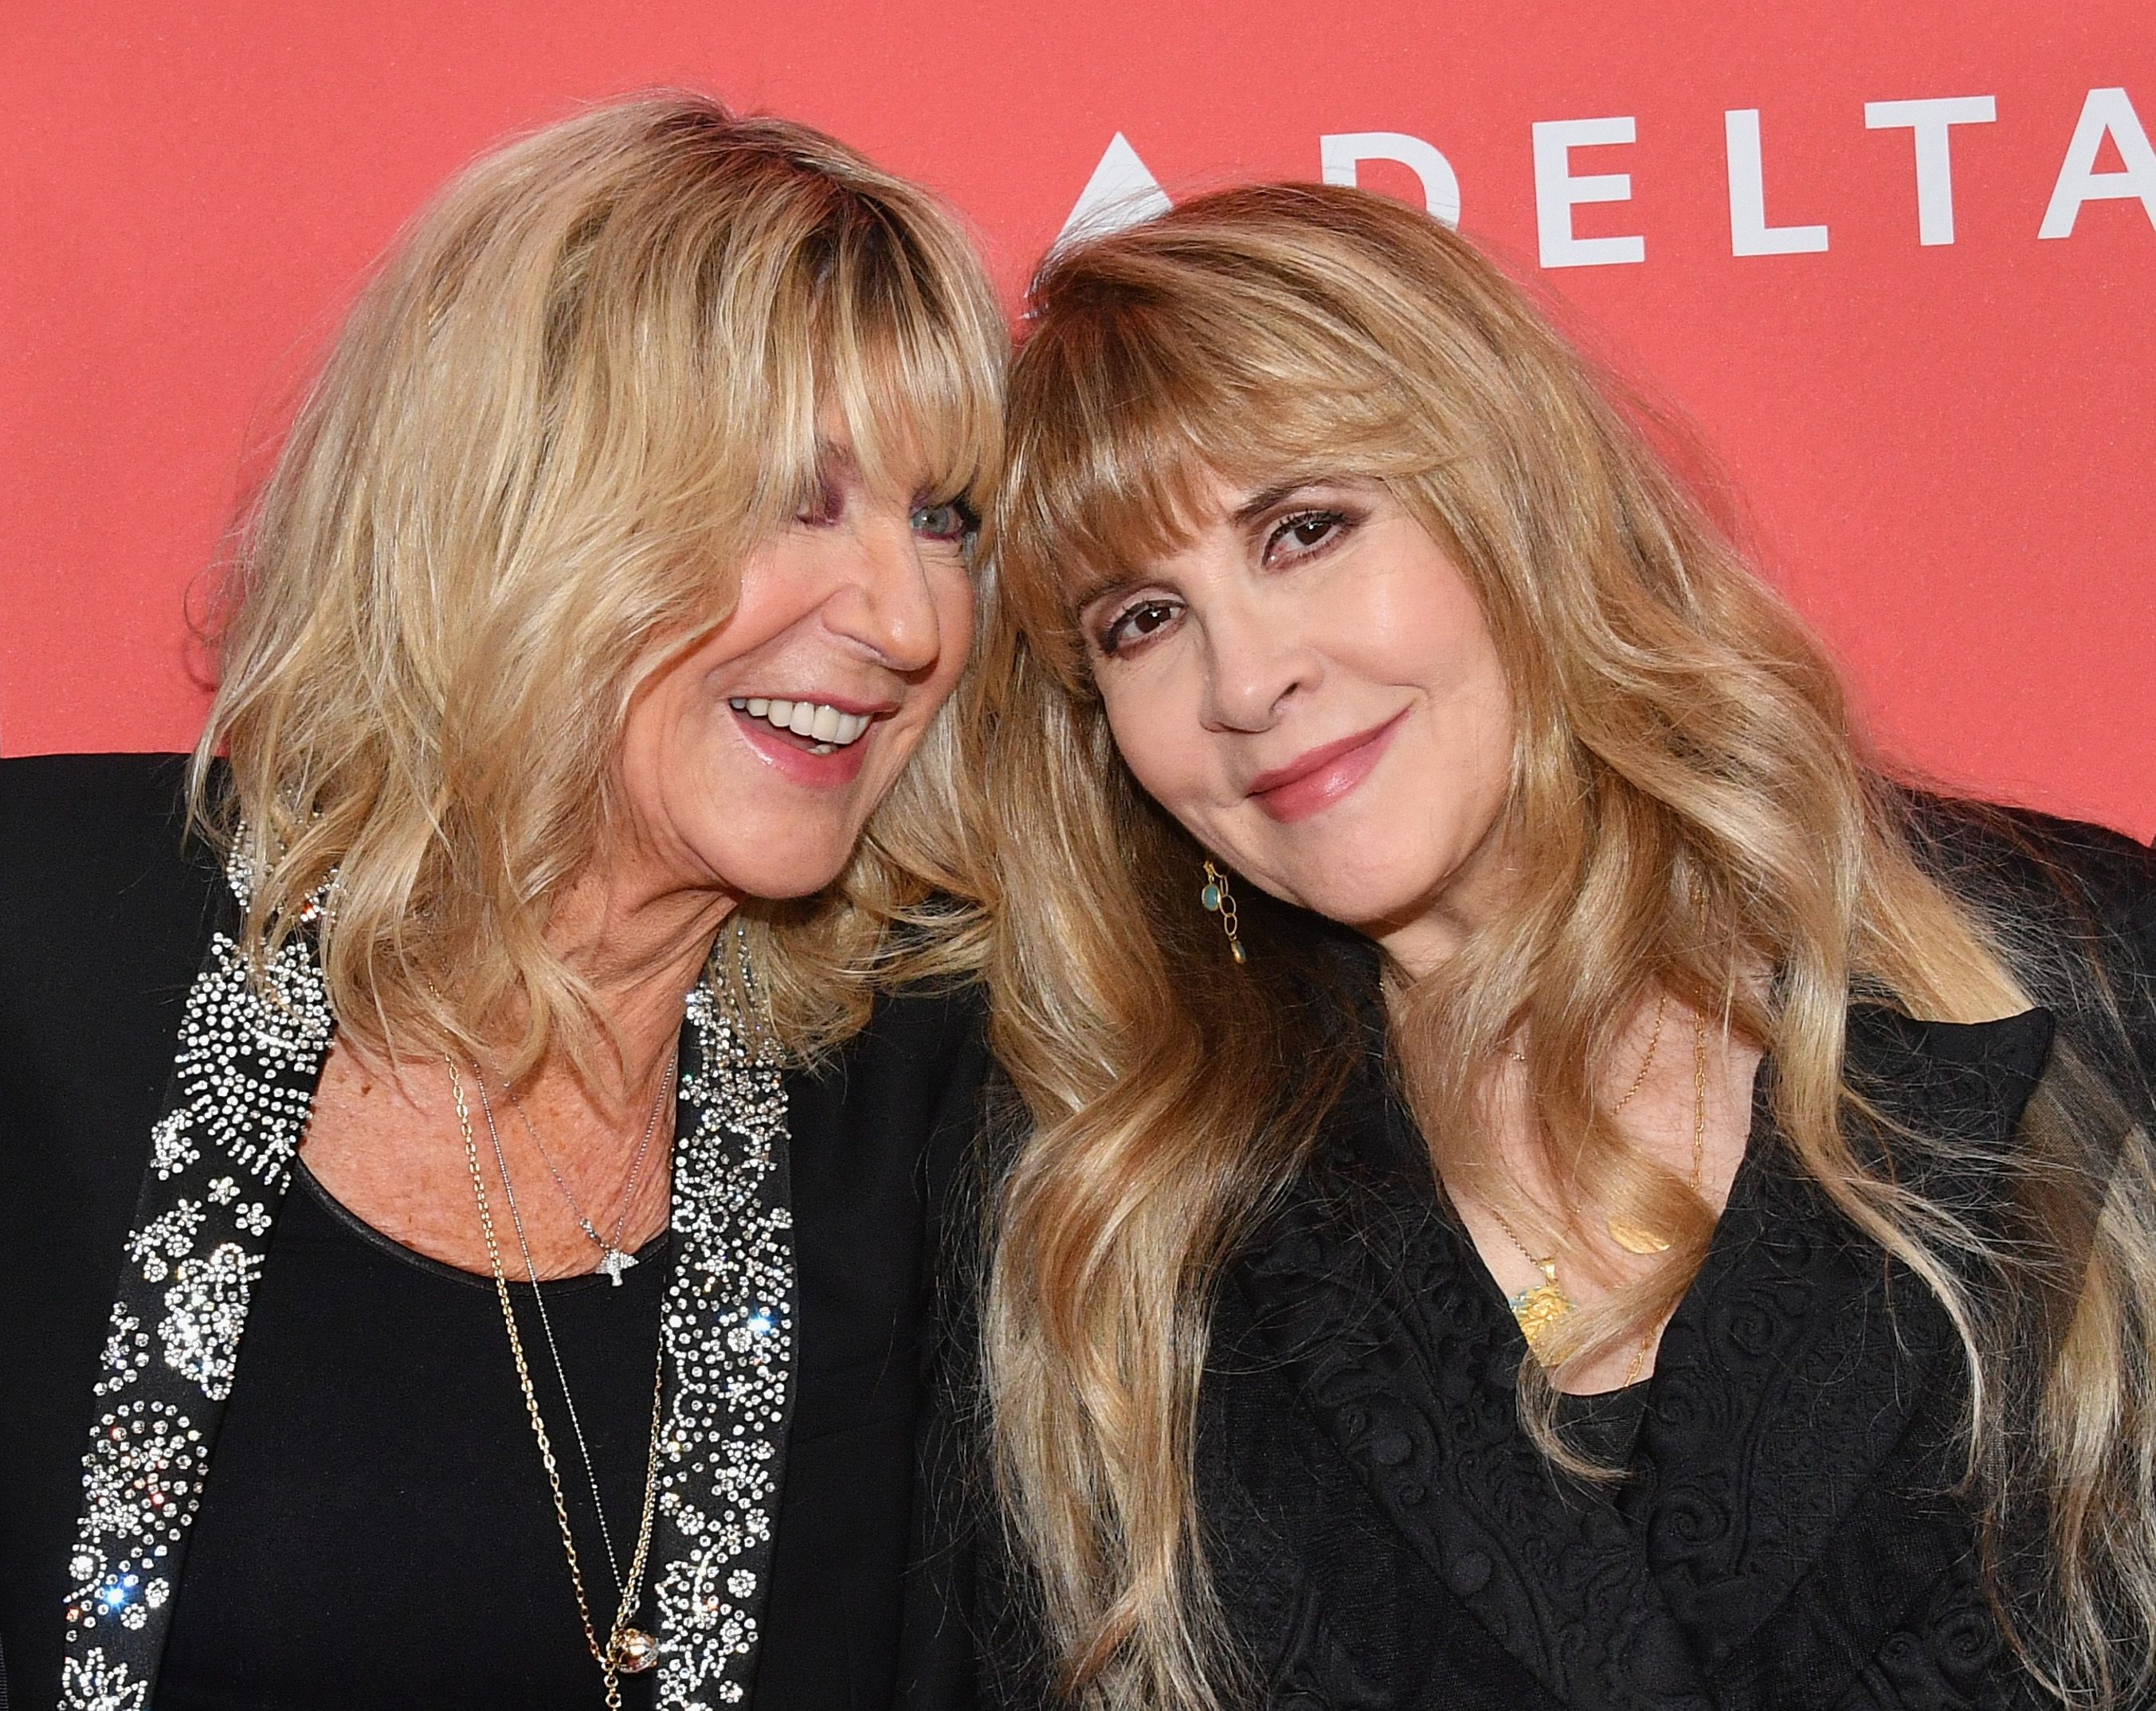 Christine McVie and Stevie Nicks wear black and pose in front of a red background.